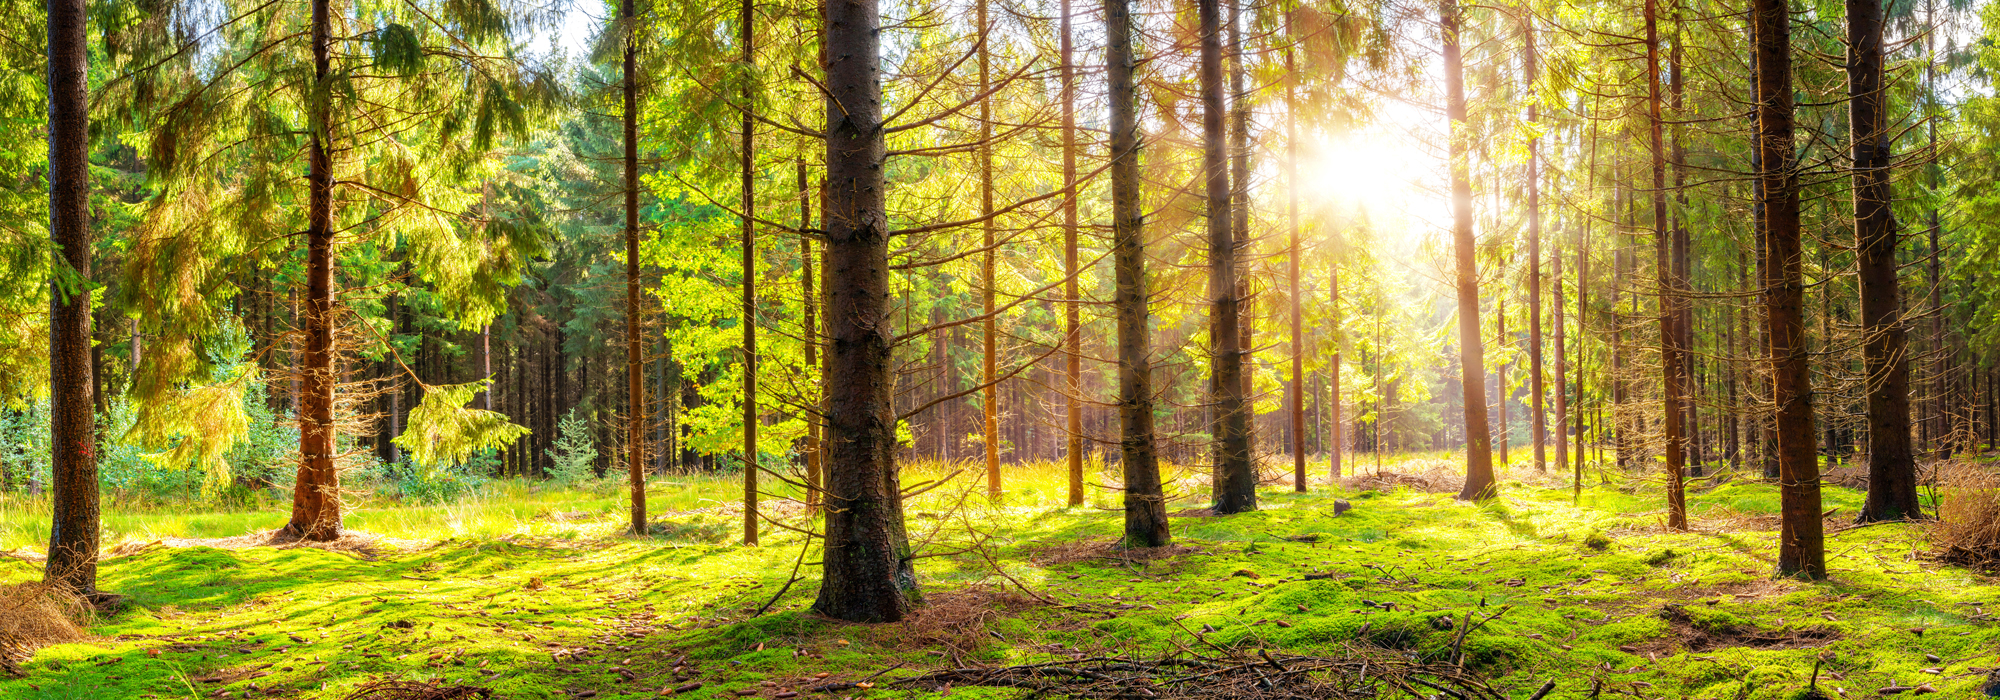 Beautiful, Green Forest With Moss Covered Soil And Bright Sun Sh